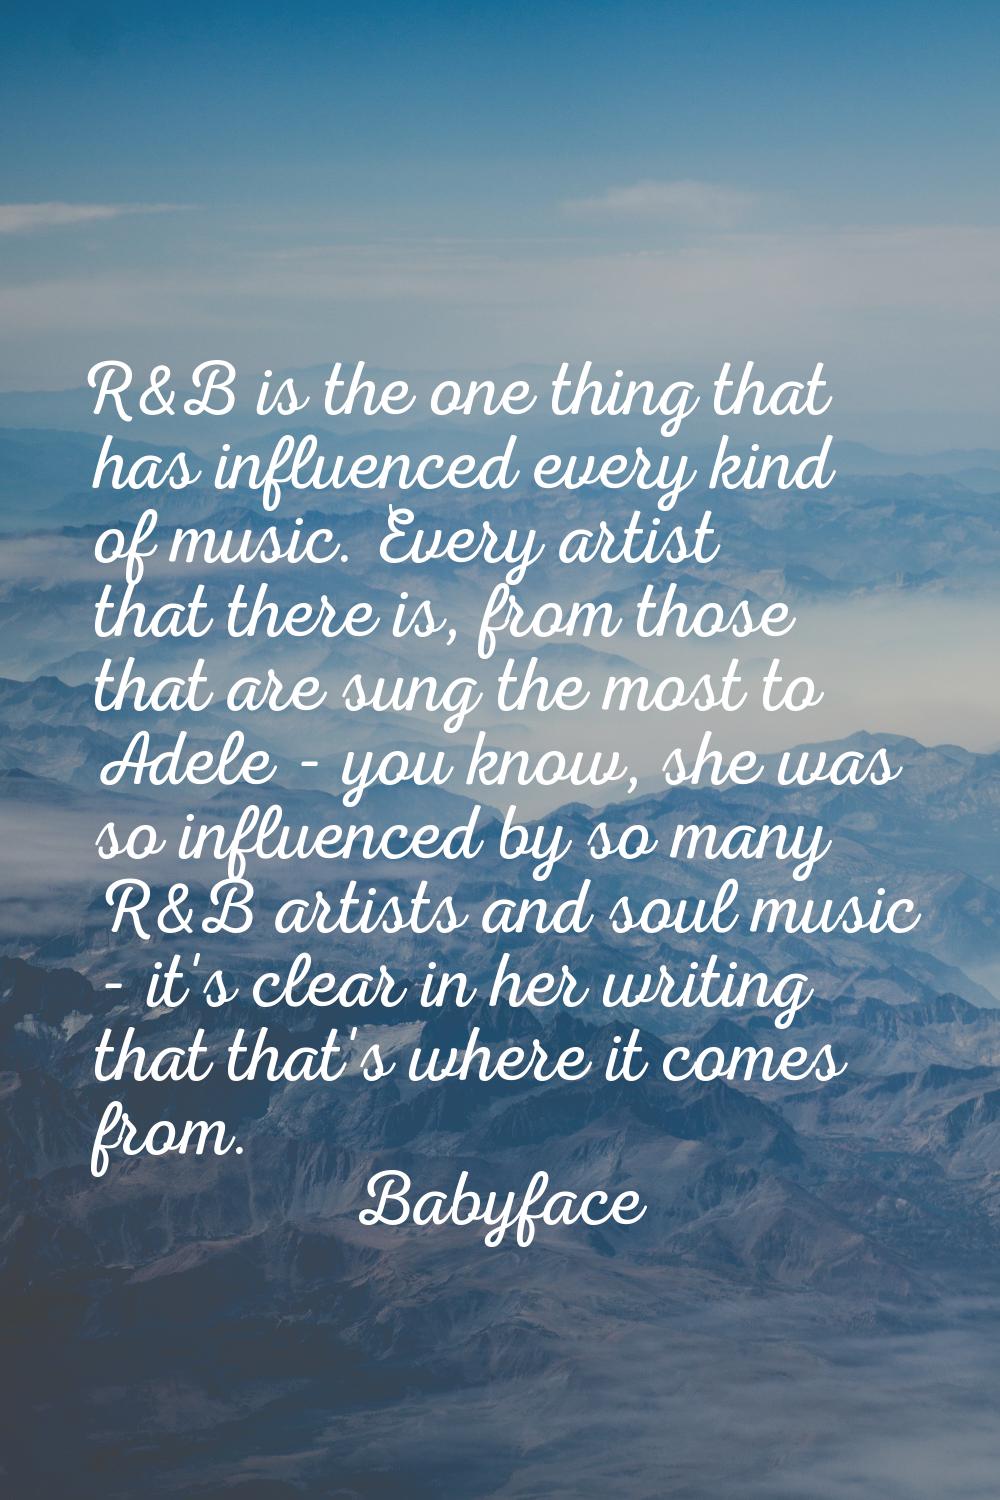 R&B is the one thing that has influenced every kind of music. Every artist that there is, from thos